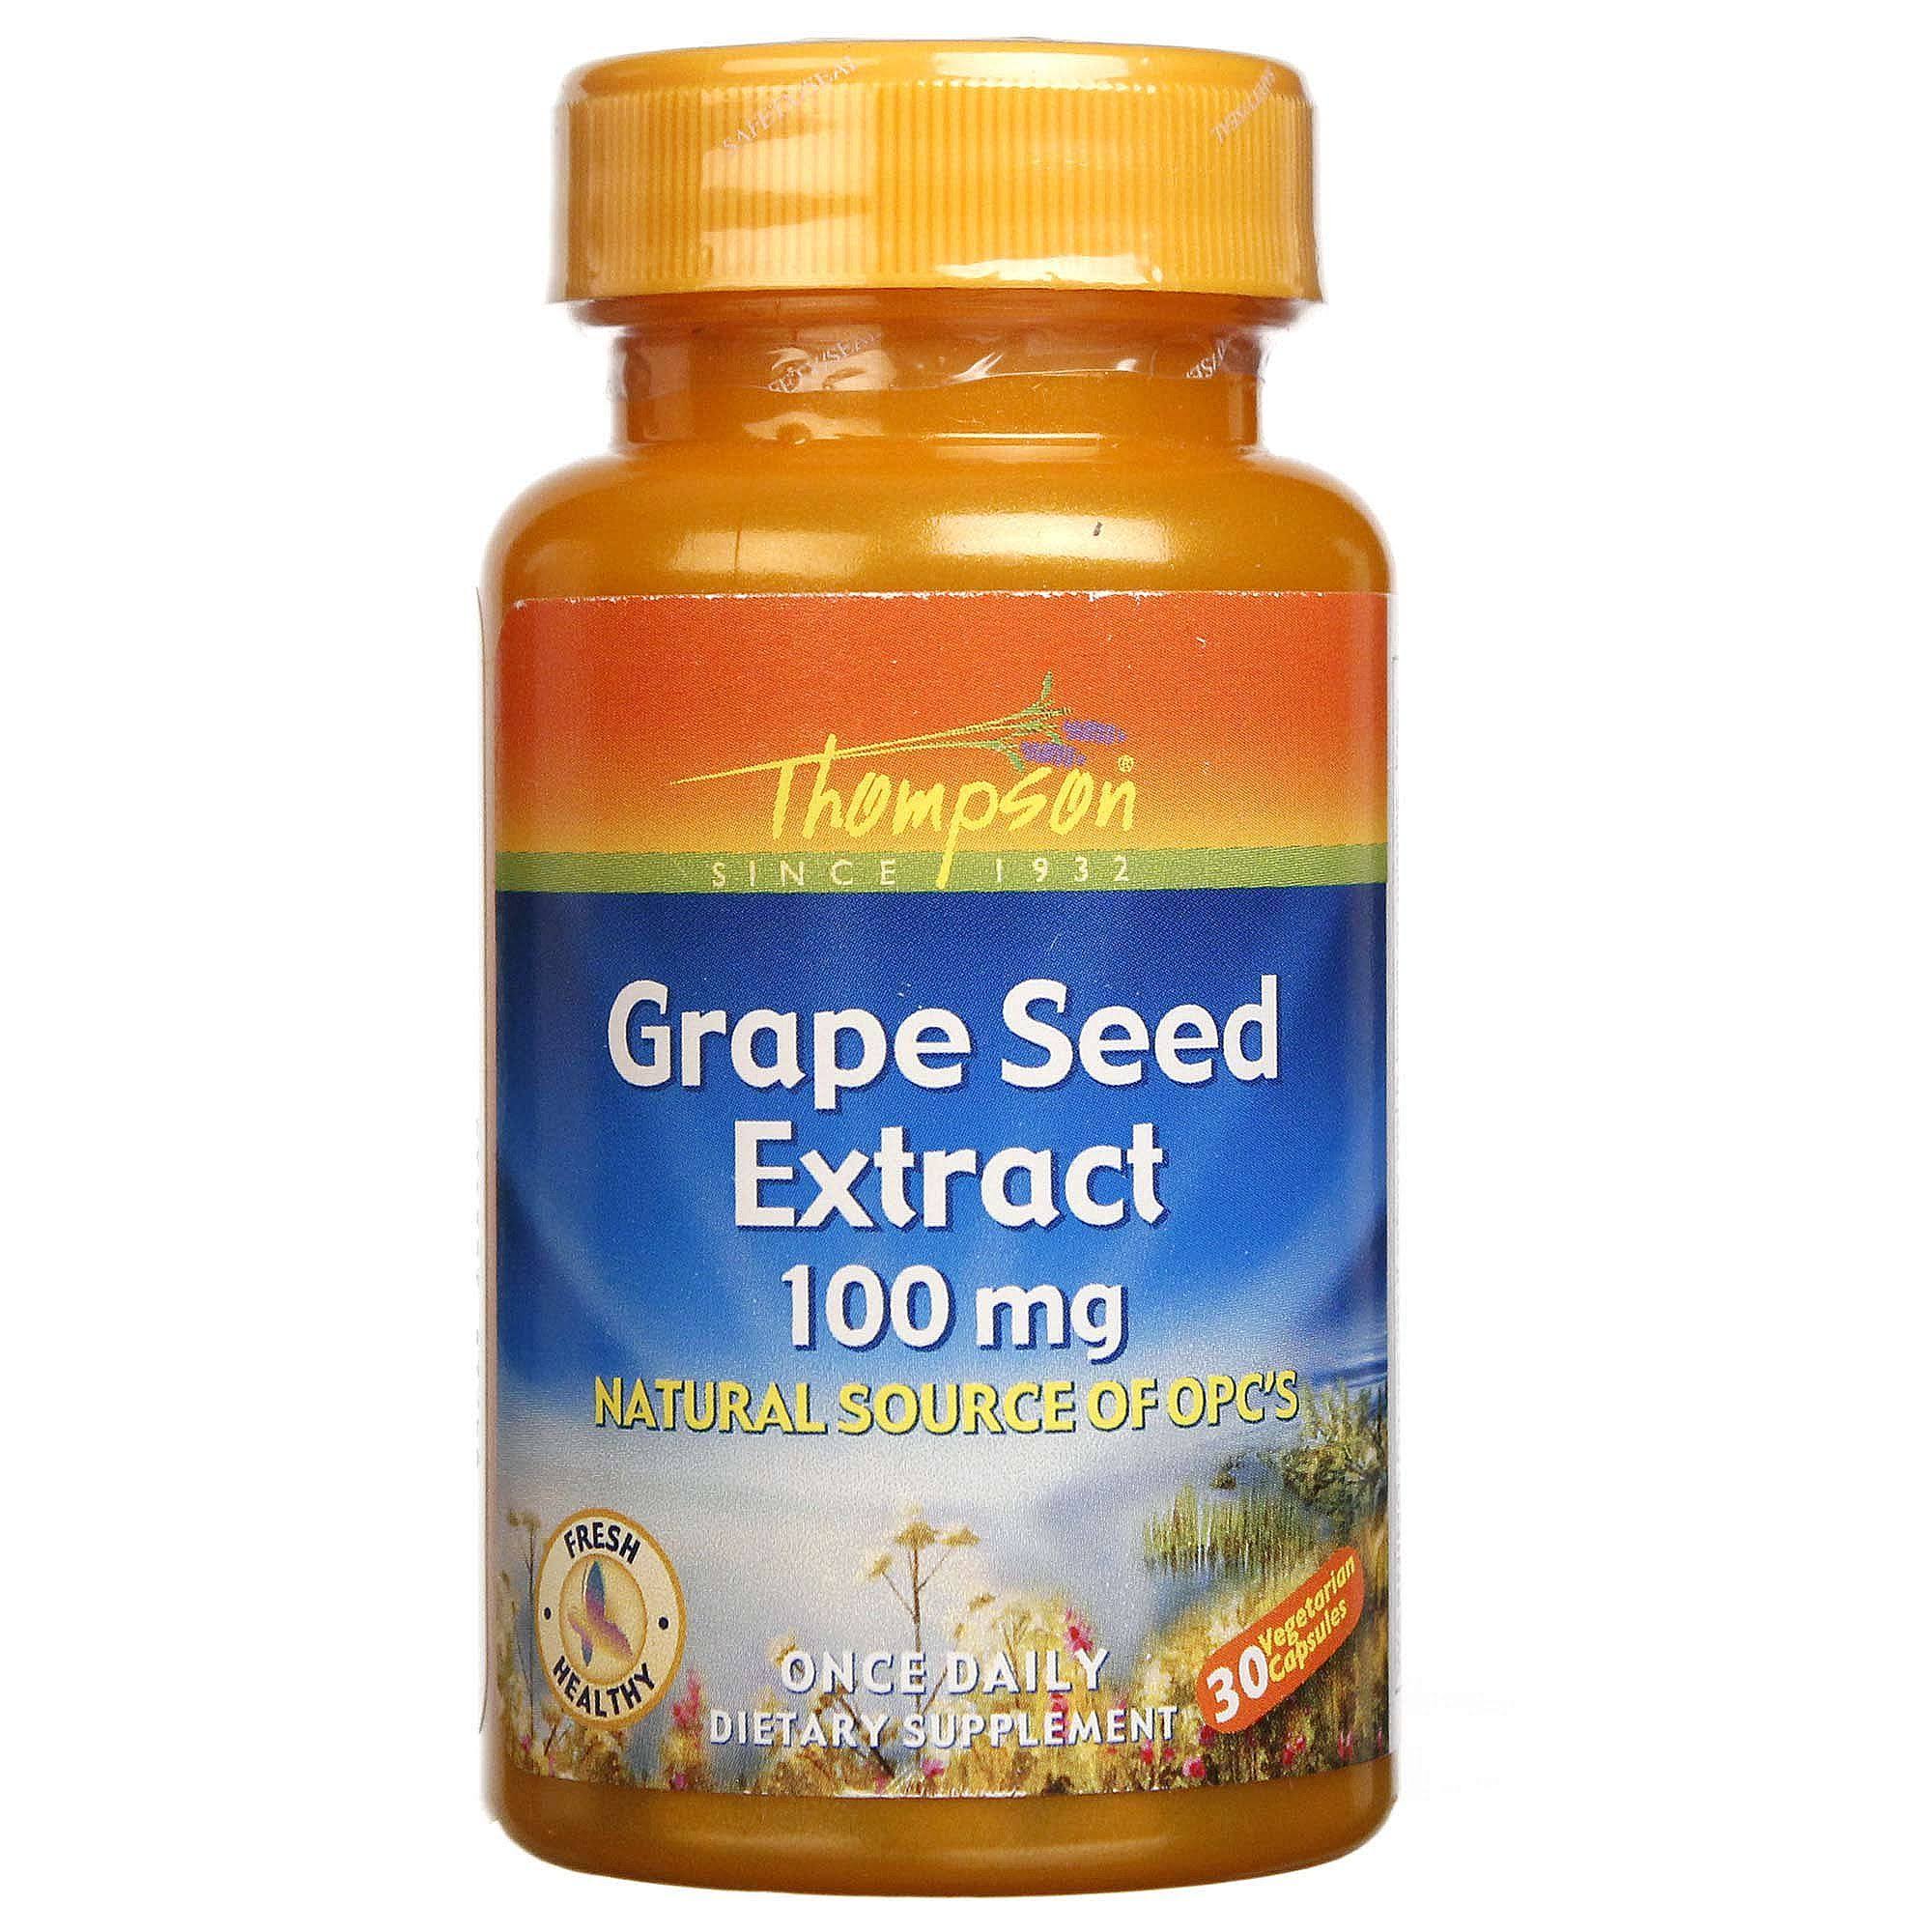 Thompson Grape Seed Extract Dietary Supplement - 100mg, 30ct